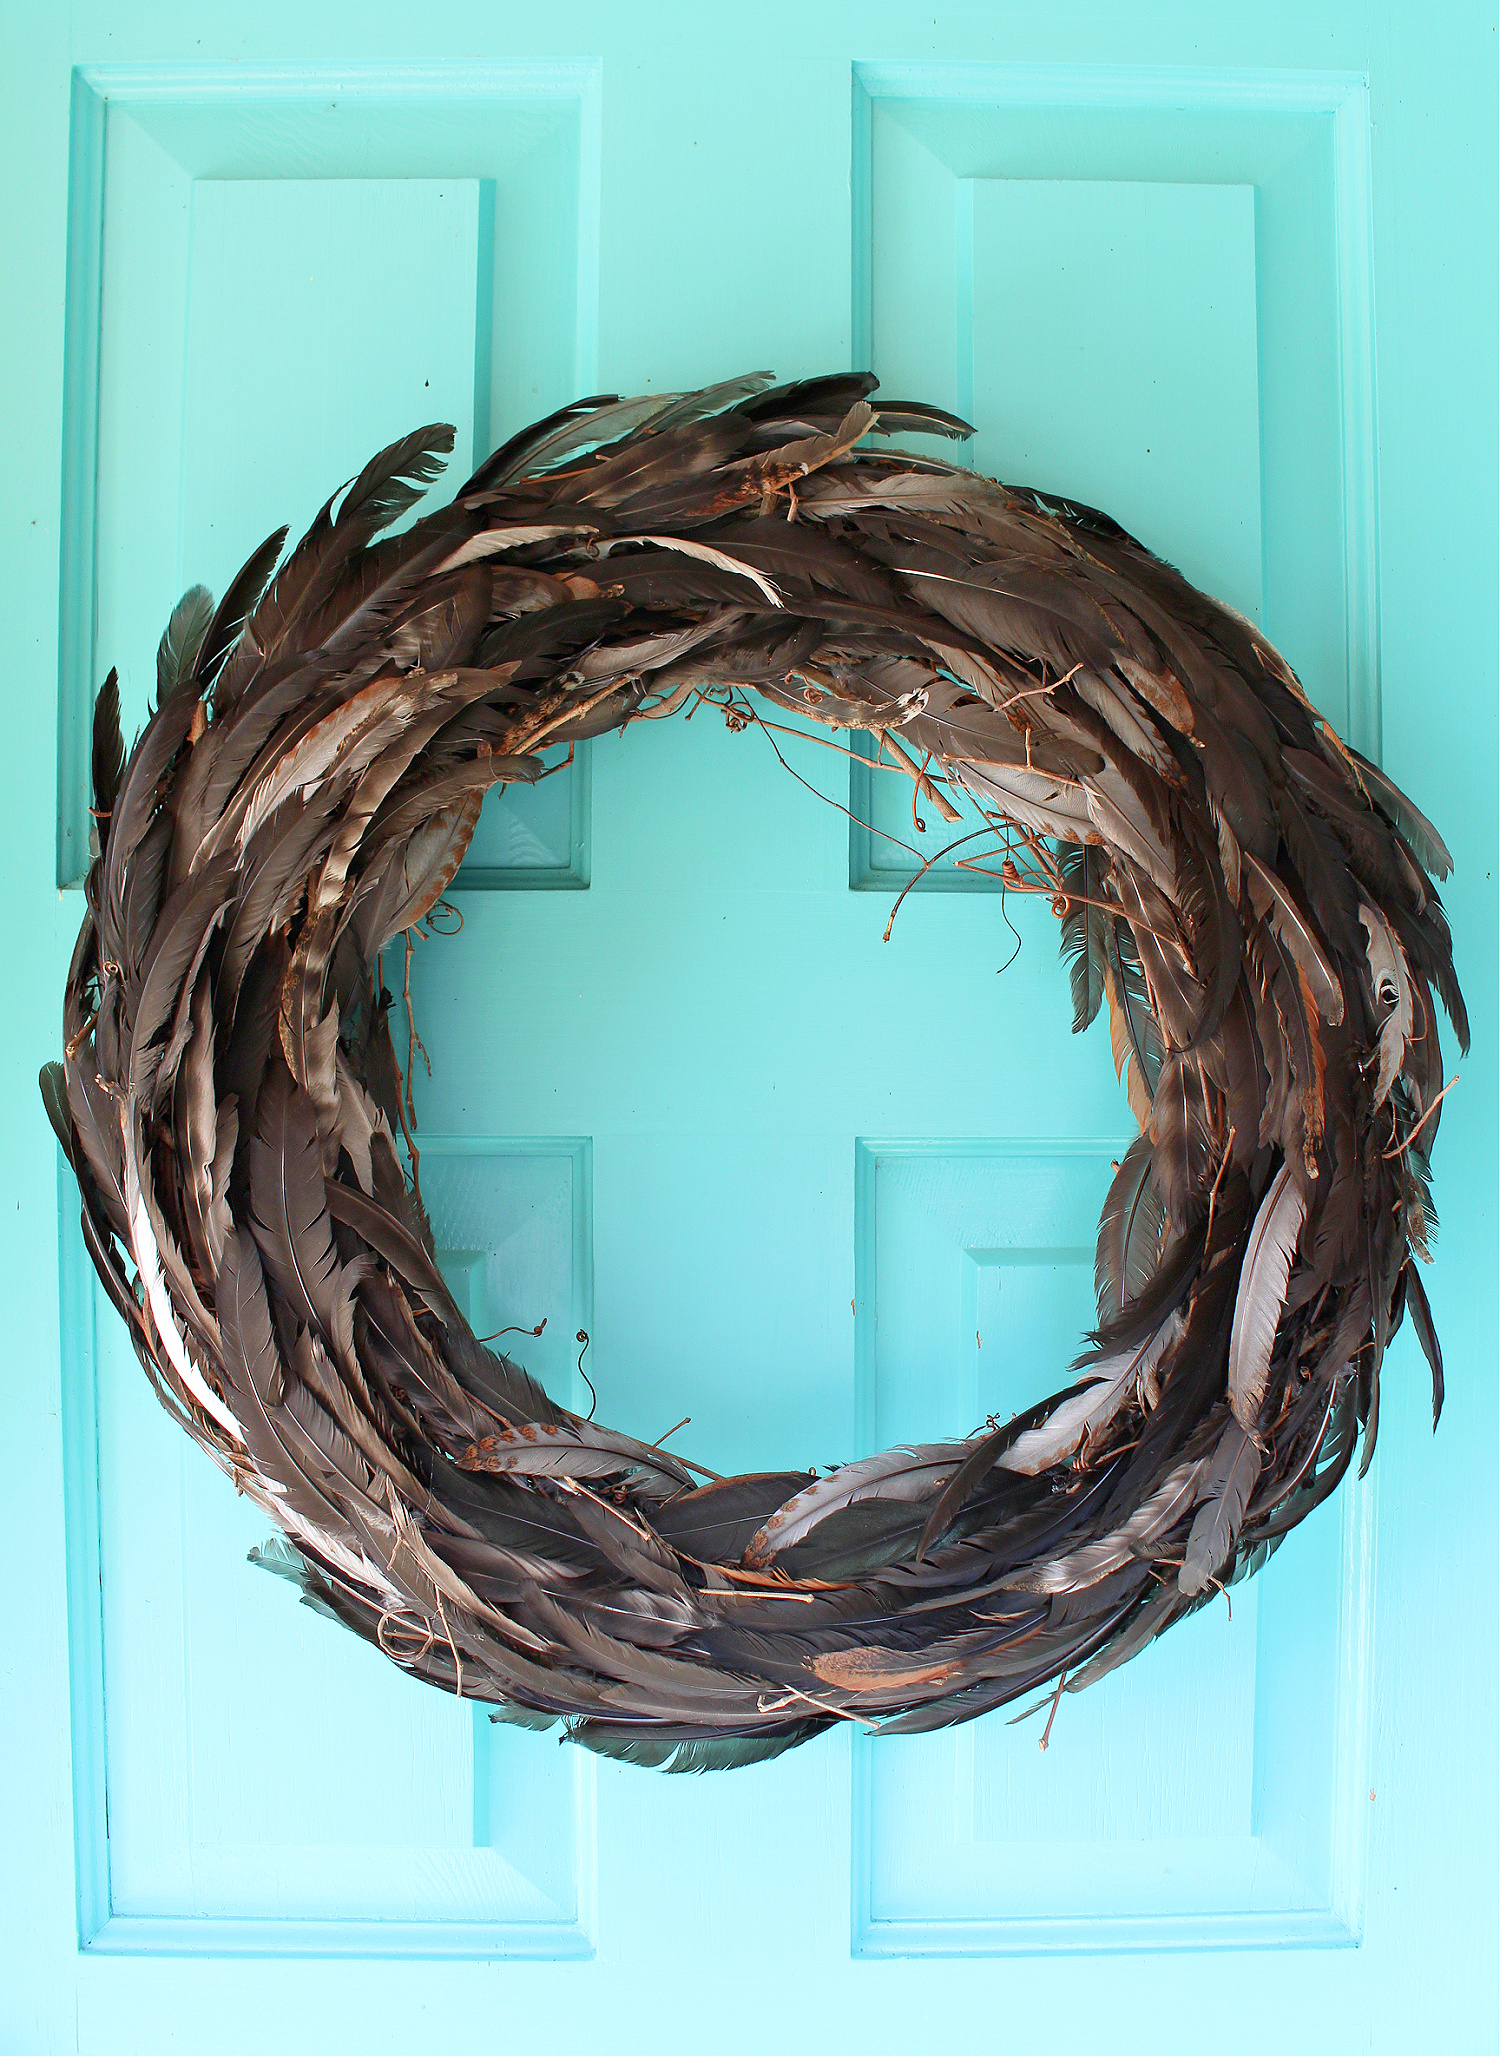 DIY Feather Wreath (Using Feathers My Chickens Molted)